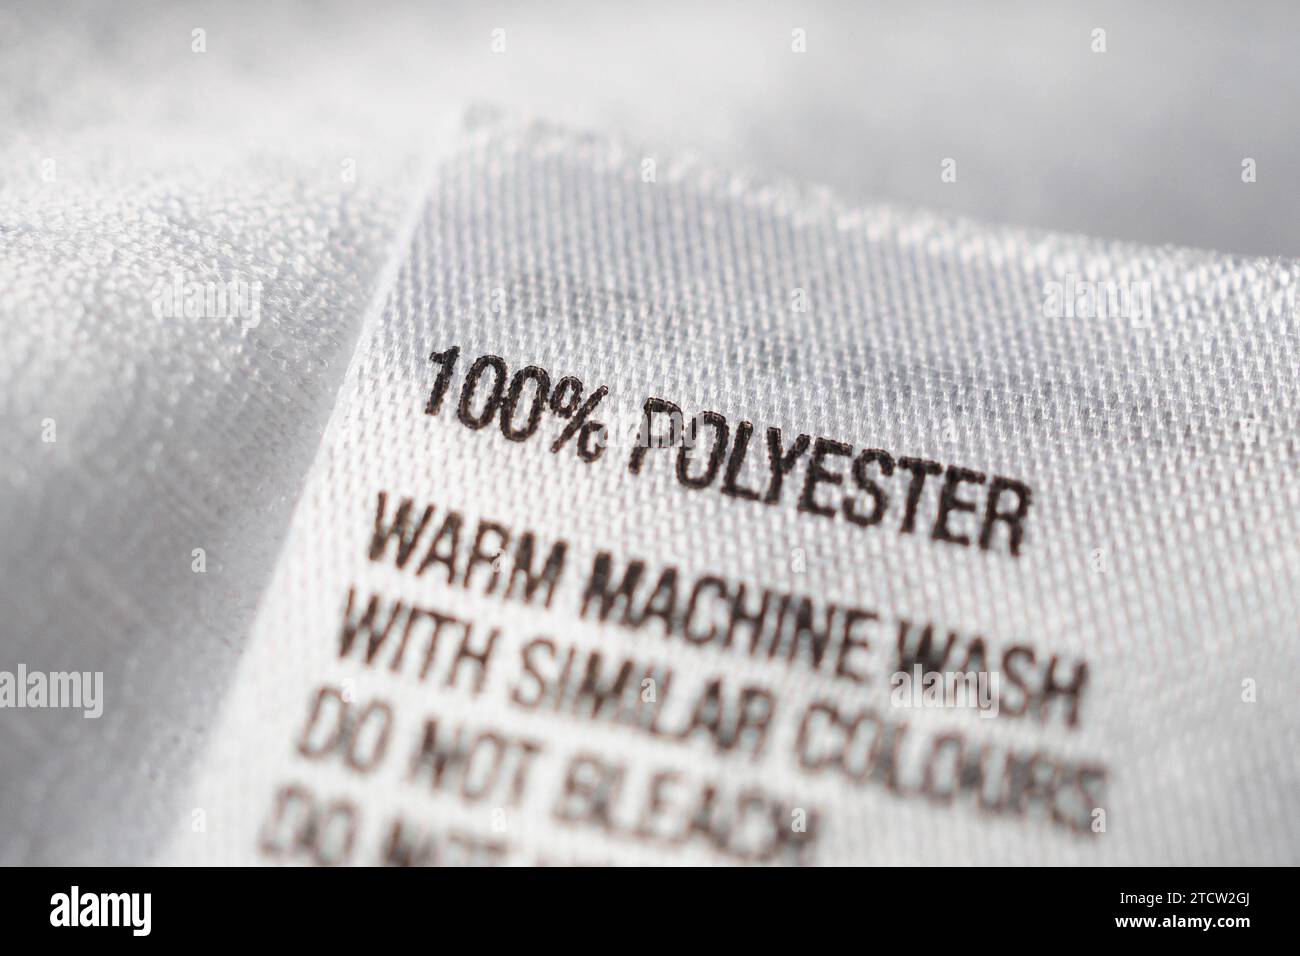 Polyester fabric Clothing label with laundry instructions Stock Photo